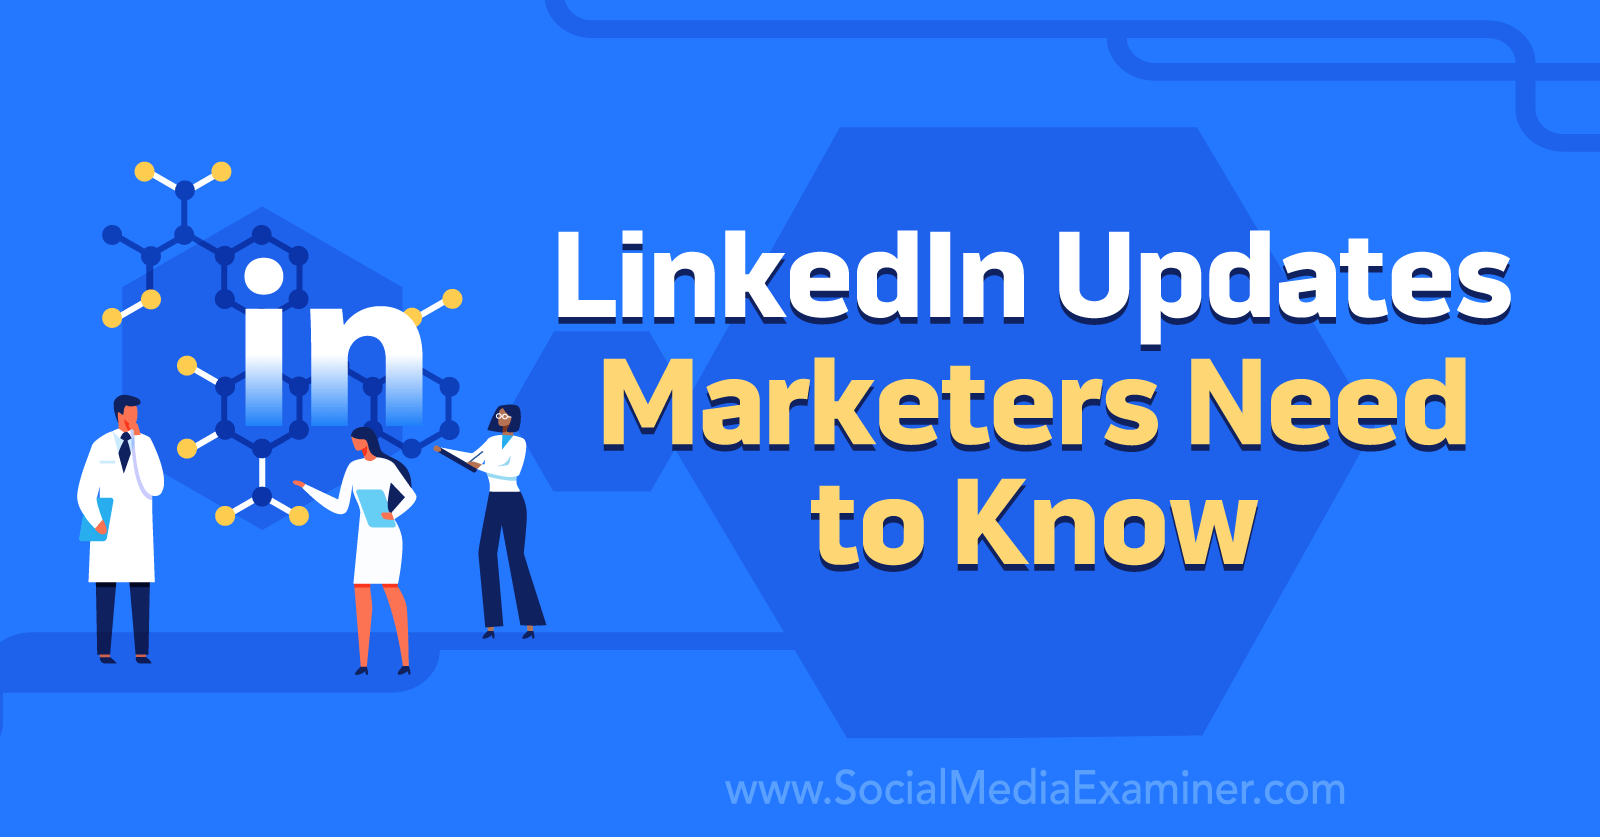 LinkedIn Updates Marketers Need to Know by Social Media Examiner